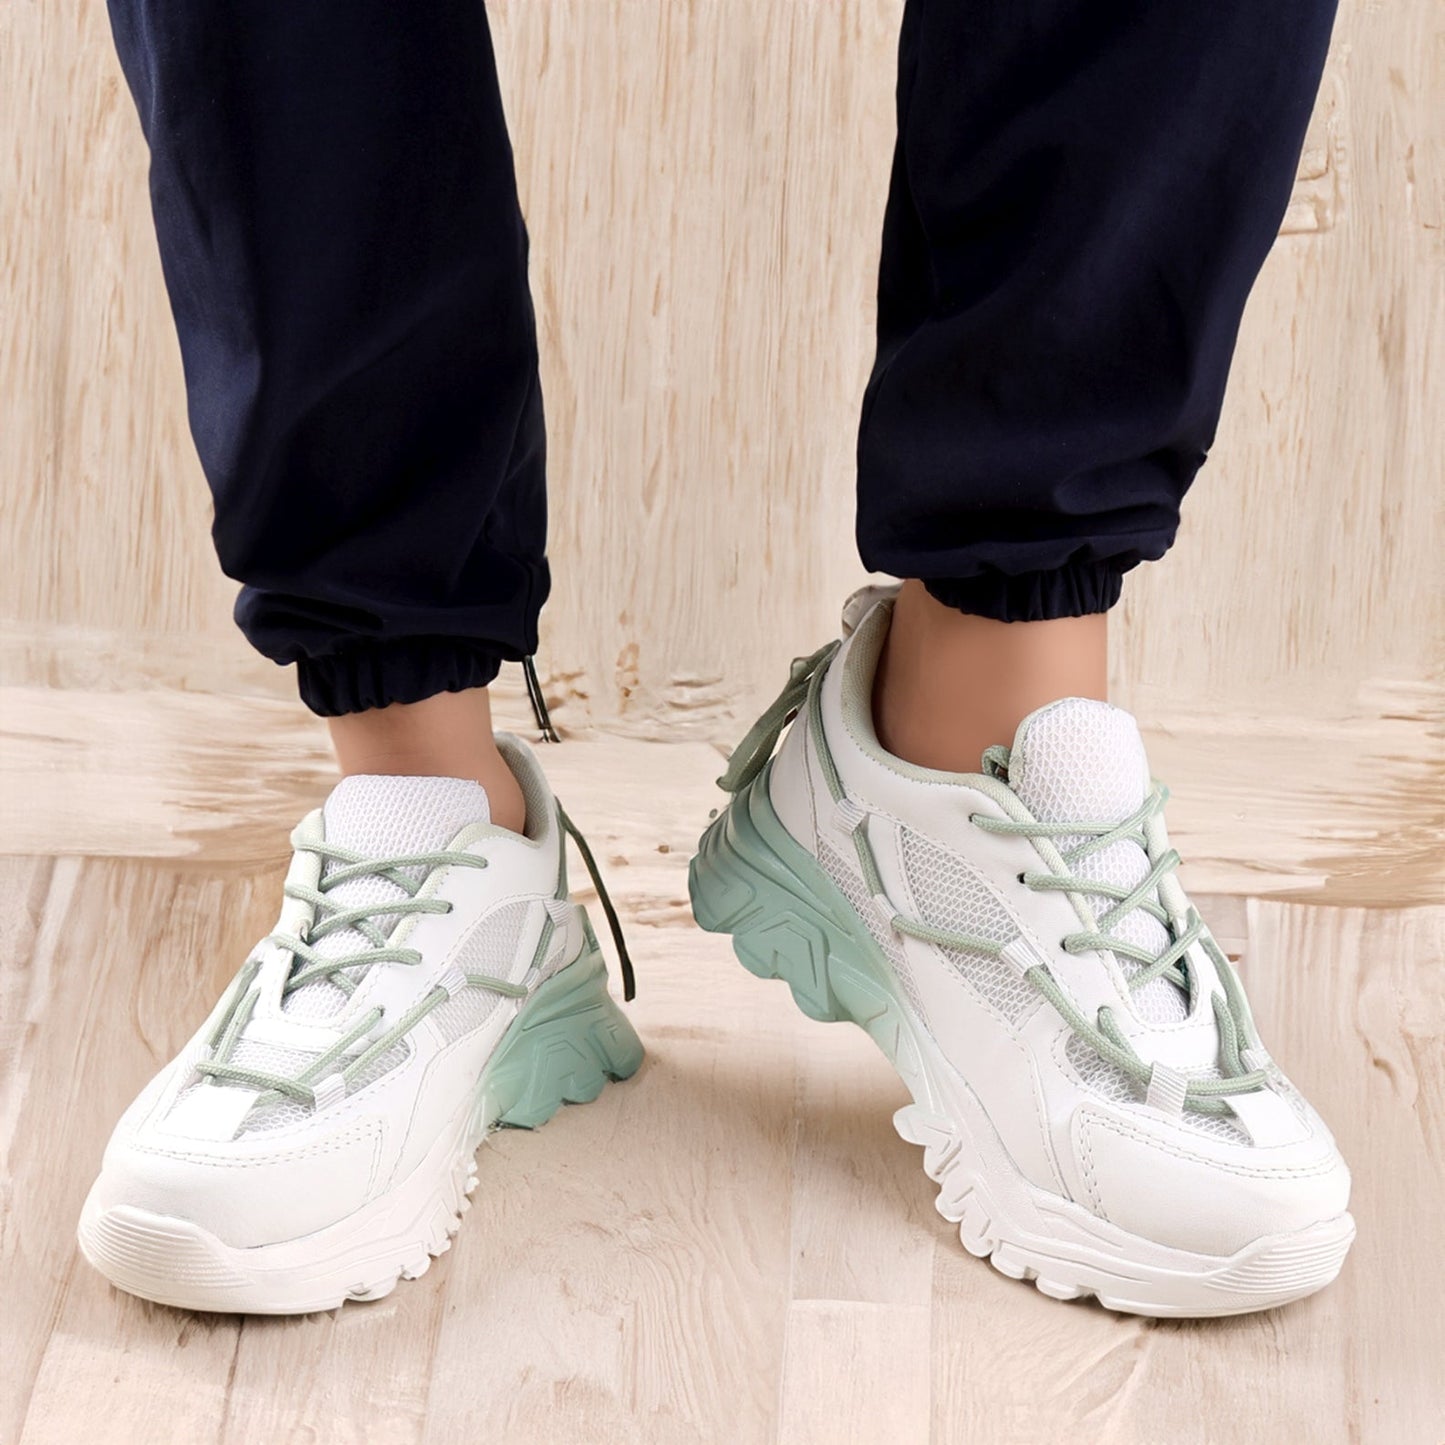 Women Stylish and Comfortable Lace-UP Casual Sneaker Shoes